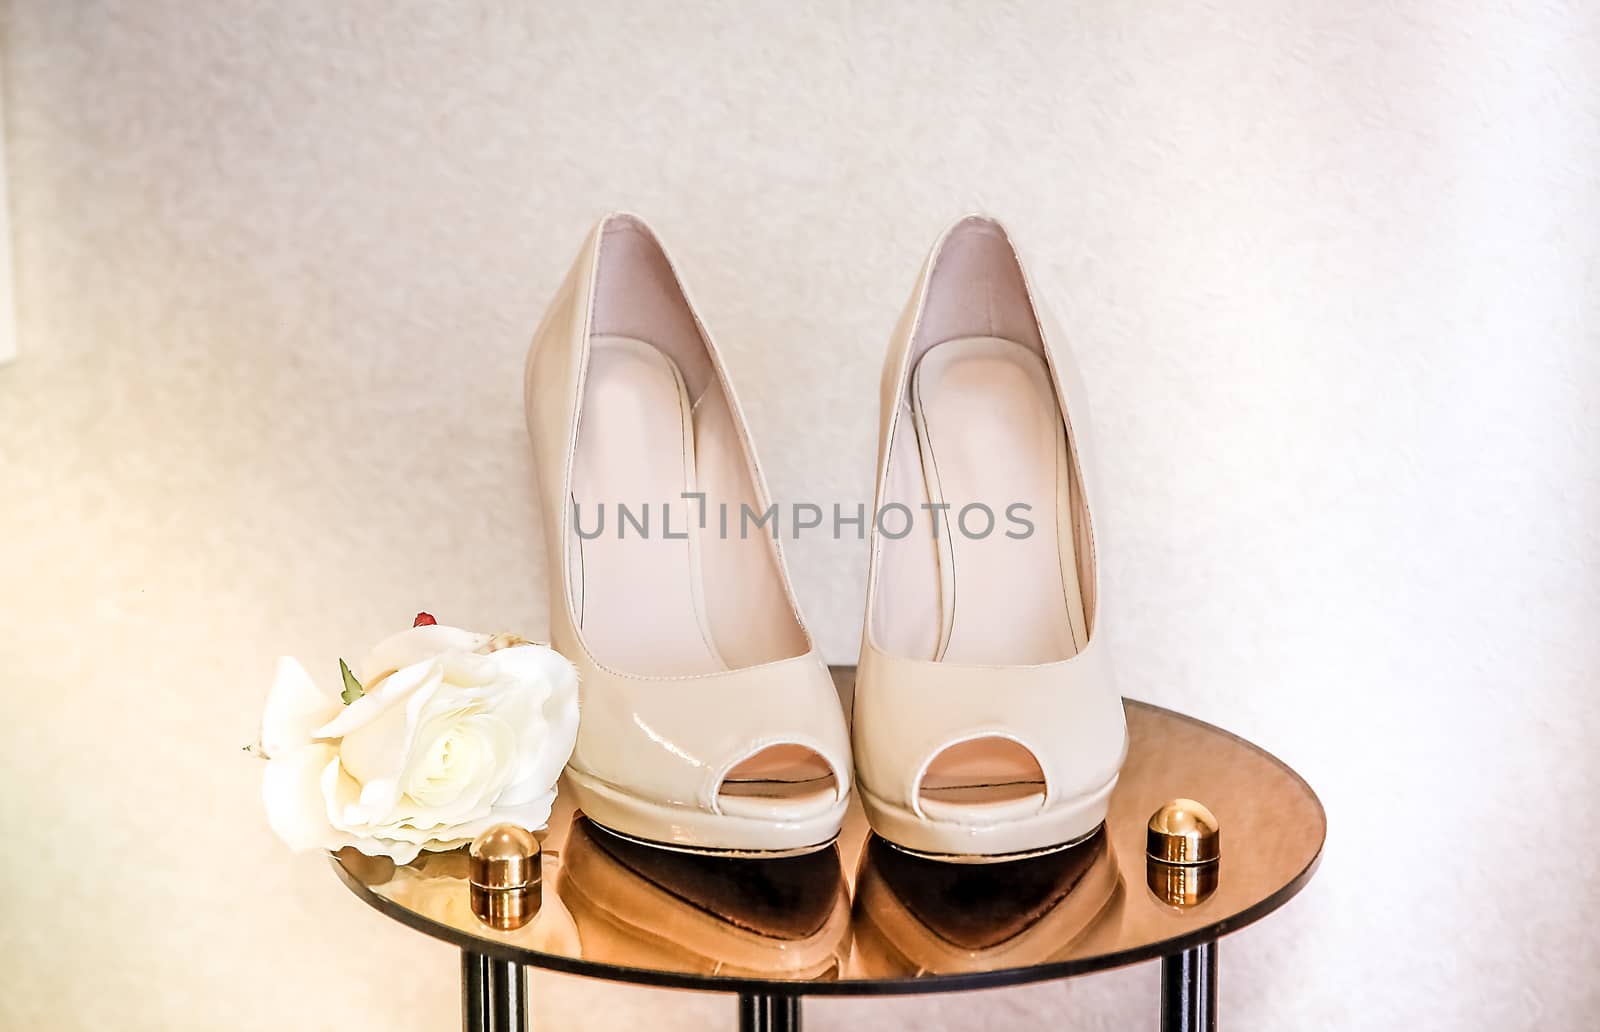 Shoes beige high-heeled stand on a mirrored table next to a rosebud